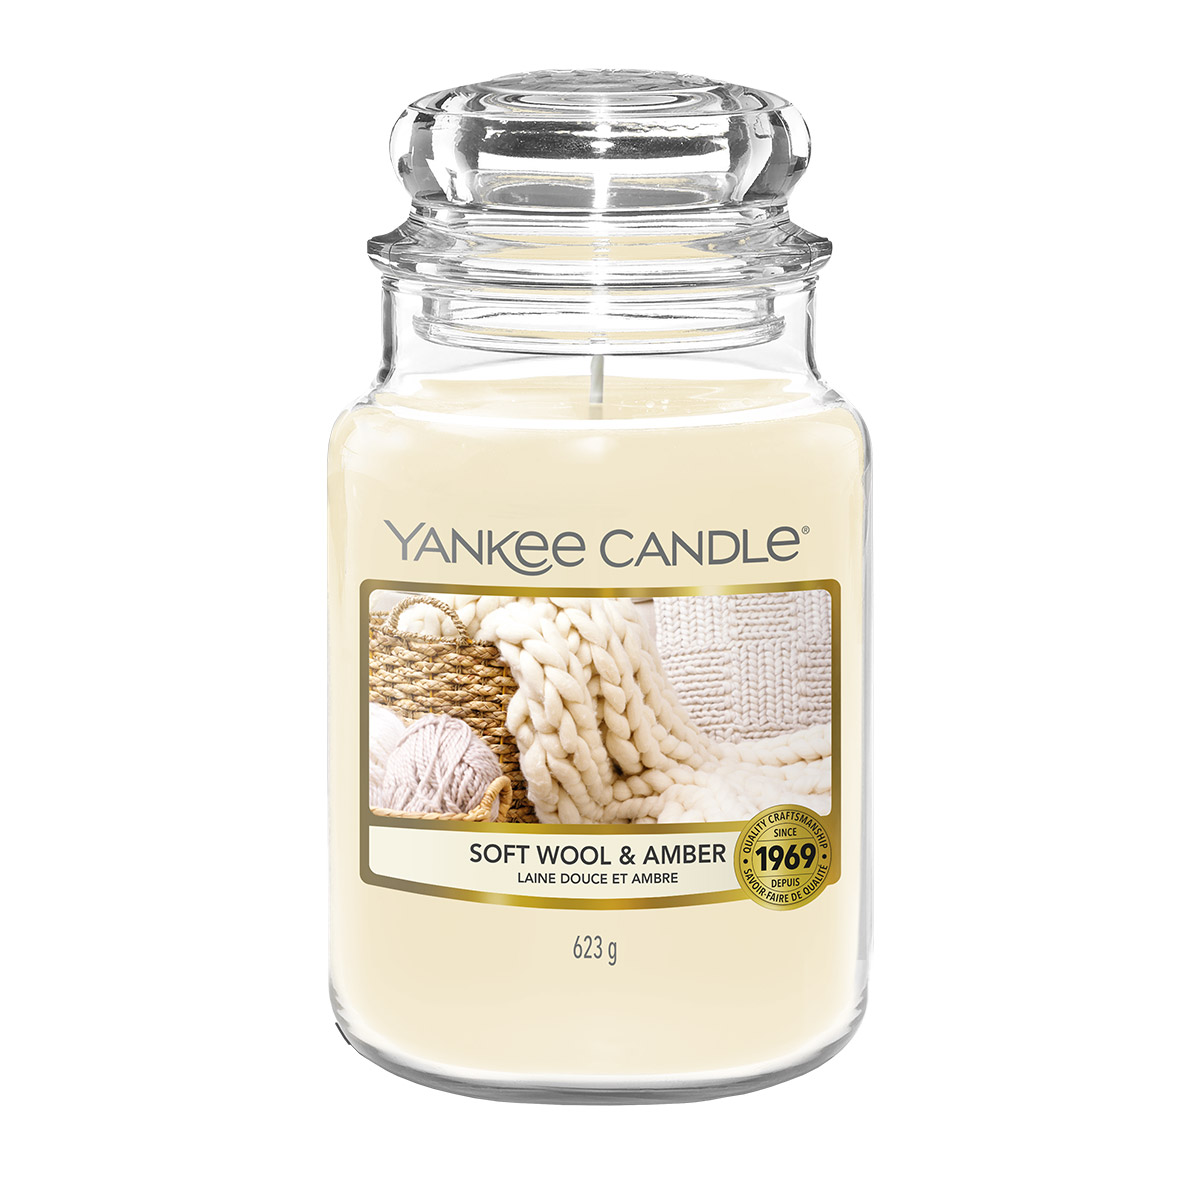 Yankee-Candle-Soft-Wool-and-Amber-Large-Classic-Jar